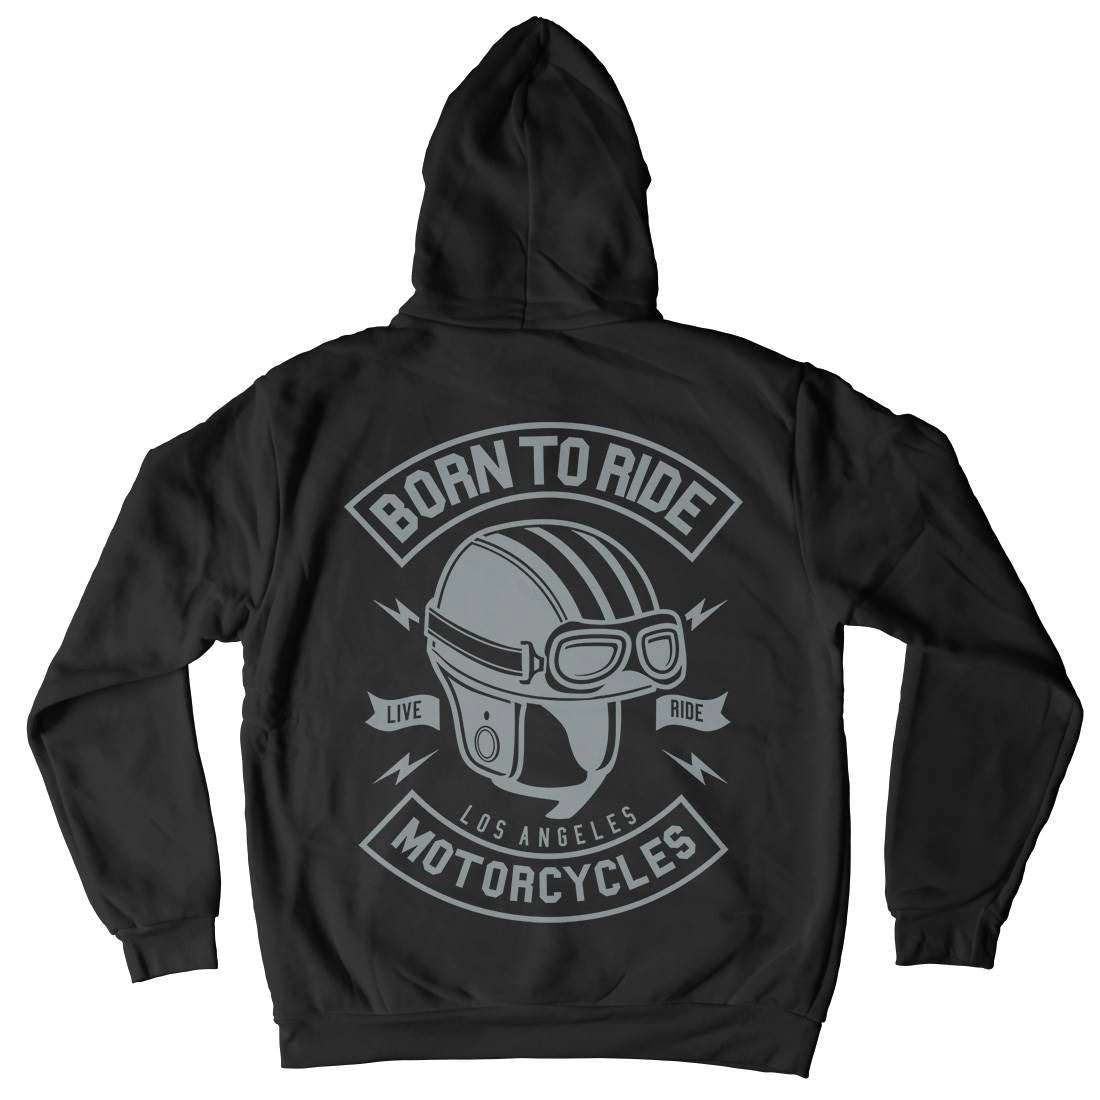 Born To Ride Mens Hoodie With Pocket Motorcycles A212